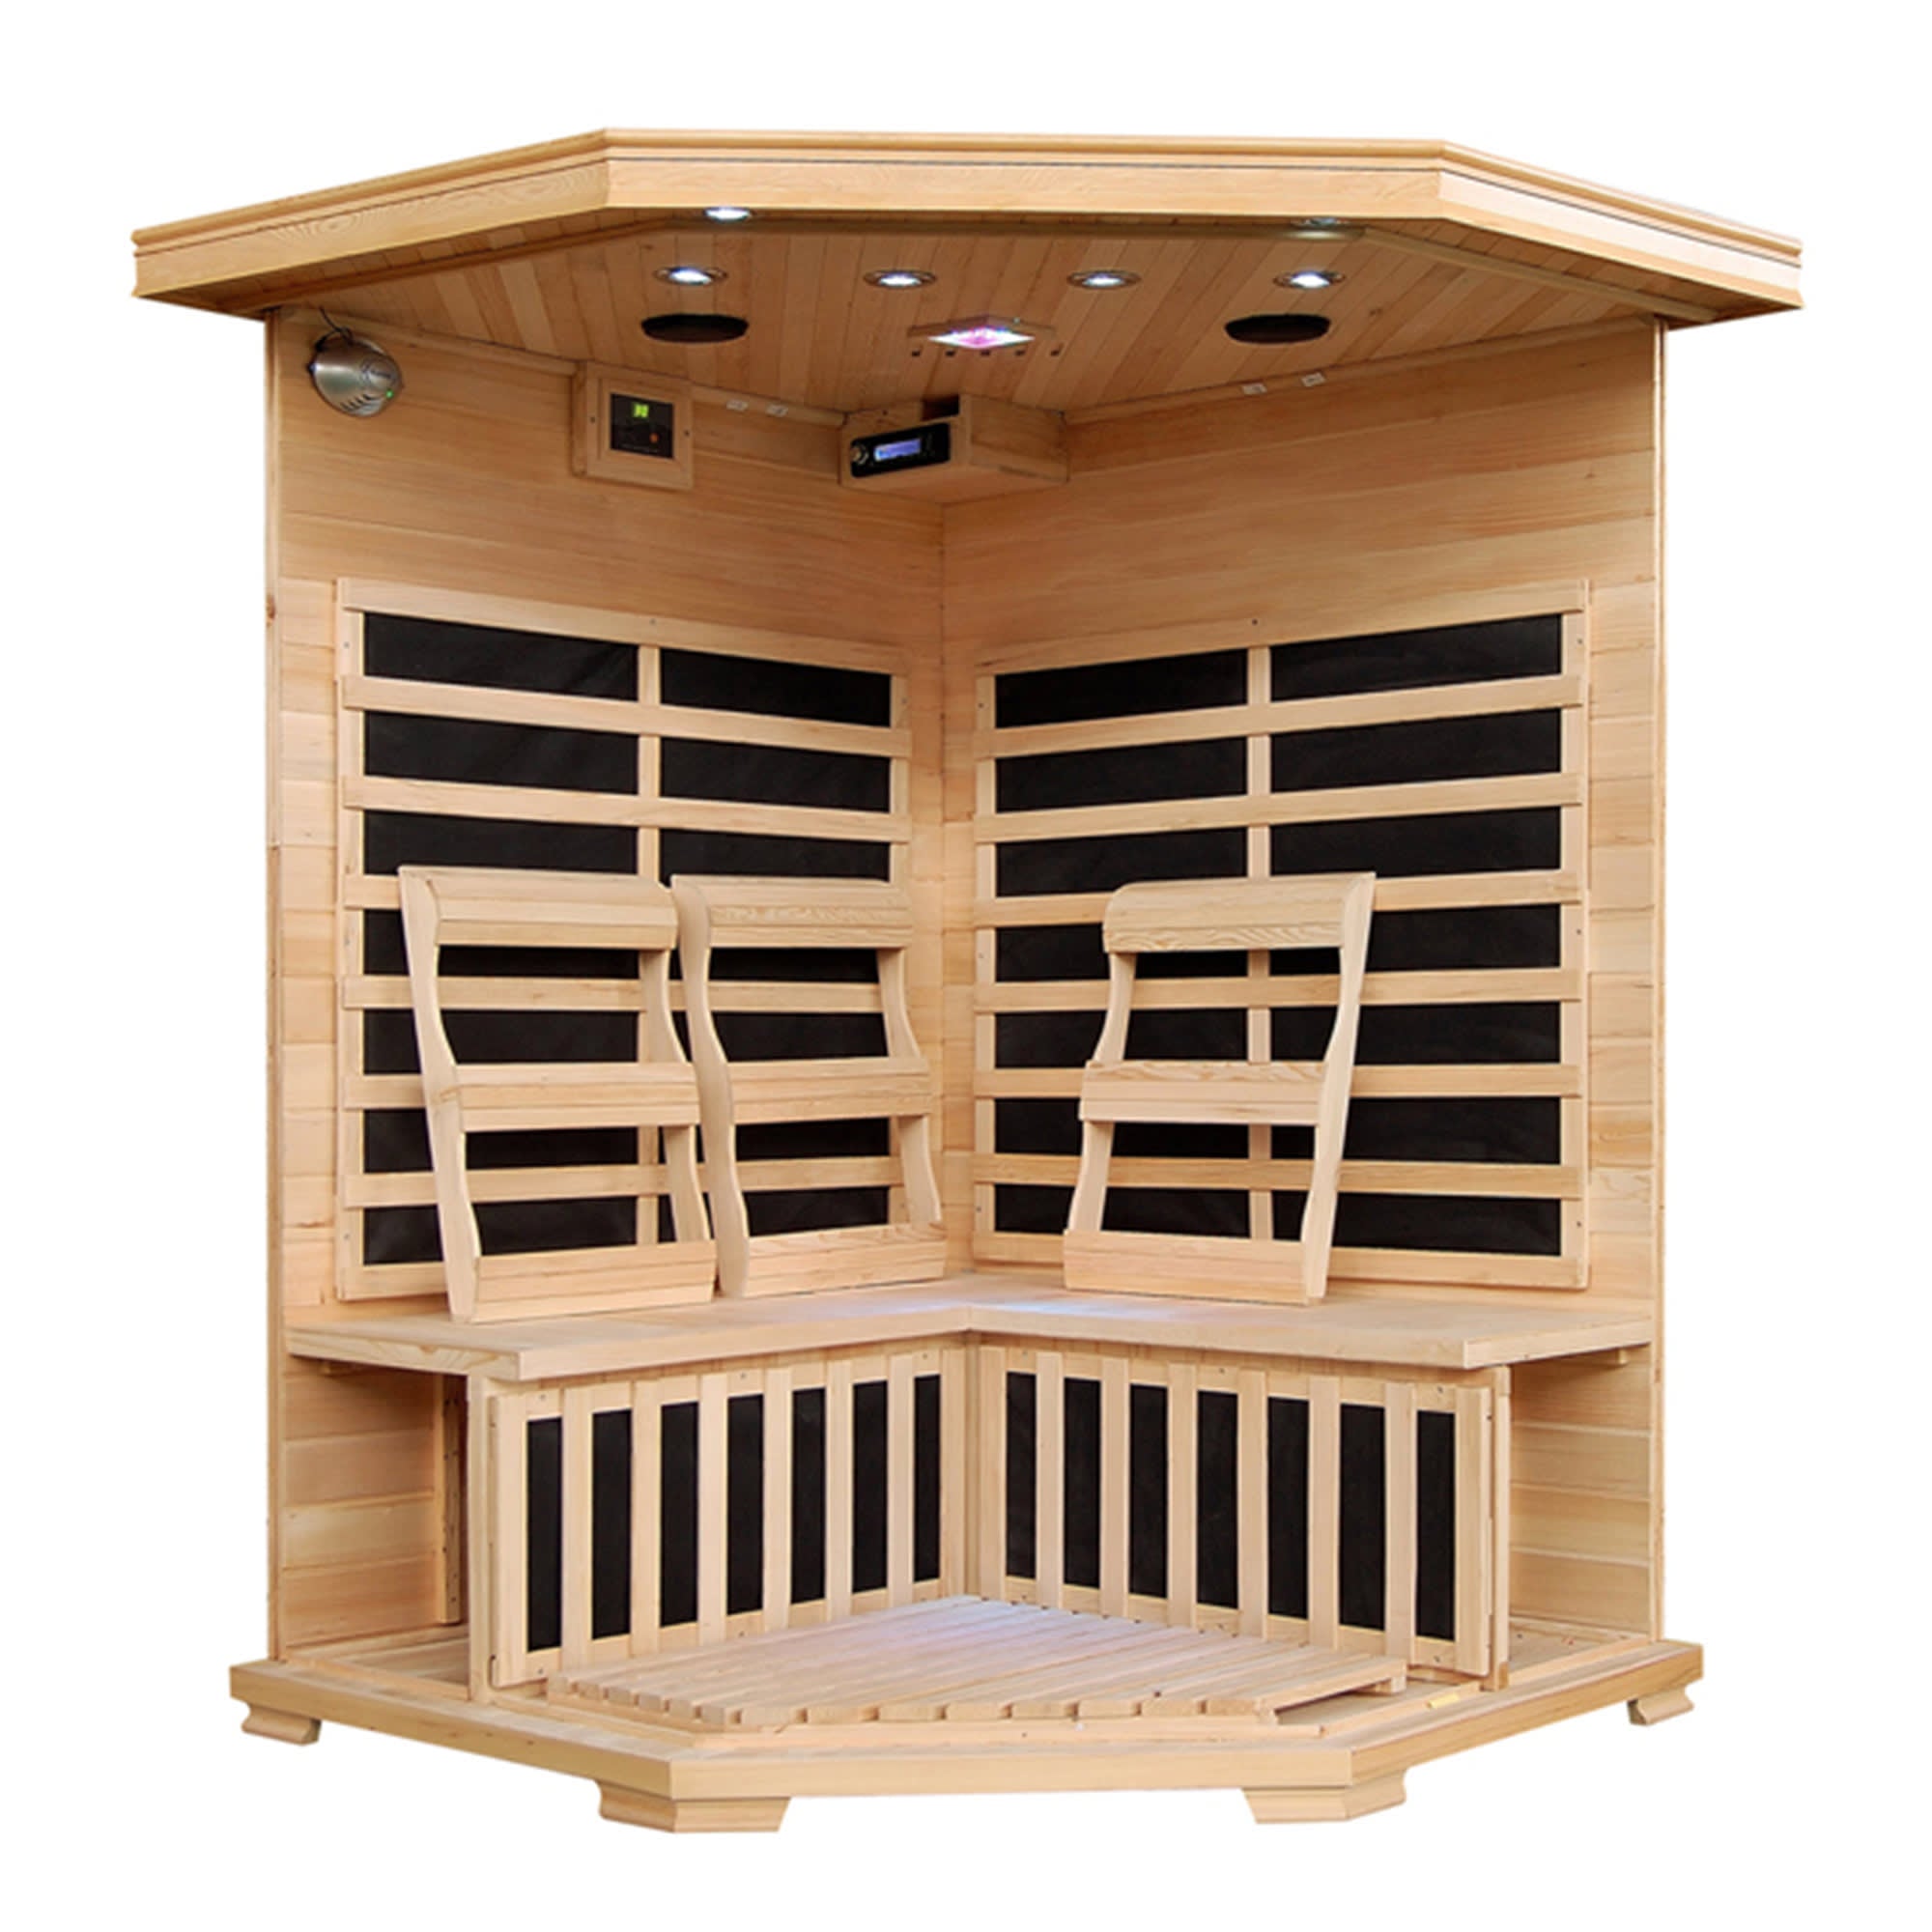 Infrared 3 Person Home Sauna With Carbon Heaters By Heatwave Saunas - Santa Fe - SA2412DX